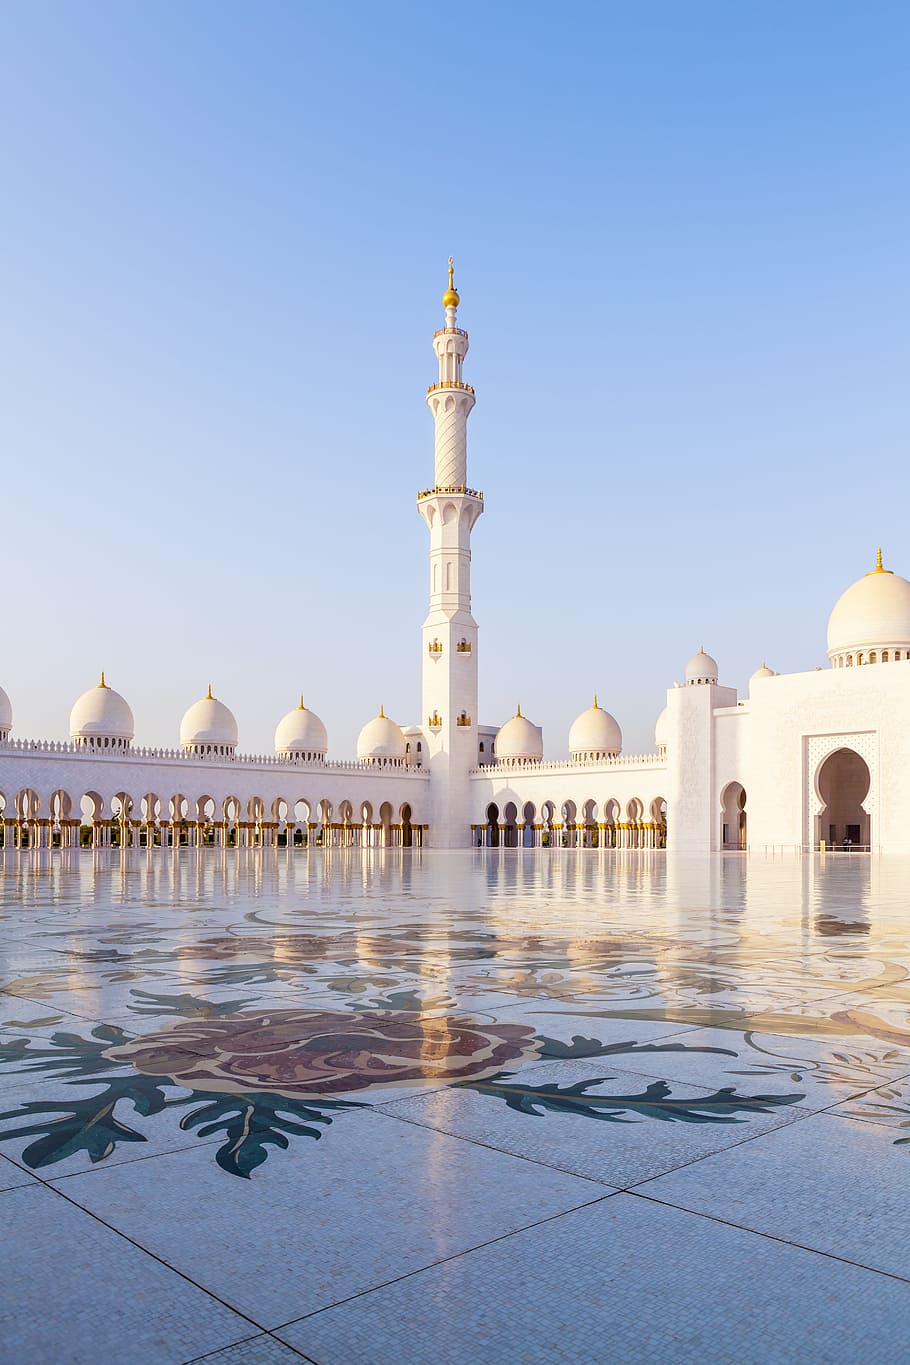 Abu Dhabi: Abu Dhabi is a modern city with a rich history and culture. From the iconic Burj Khalifa to the beautiful beaches and parks, there is so much to see and do in this wonderful city. Whether you are a history buff or a thrill-seeker, you will love the images related to Abu Dhabi!